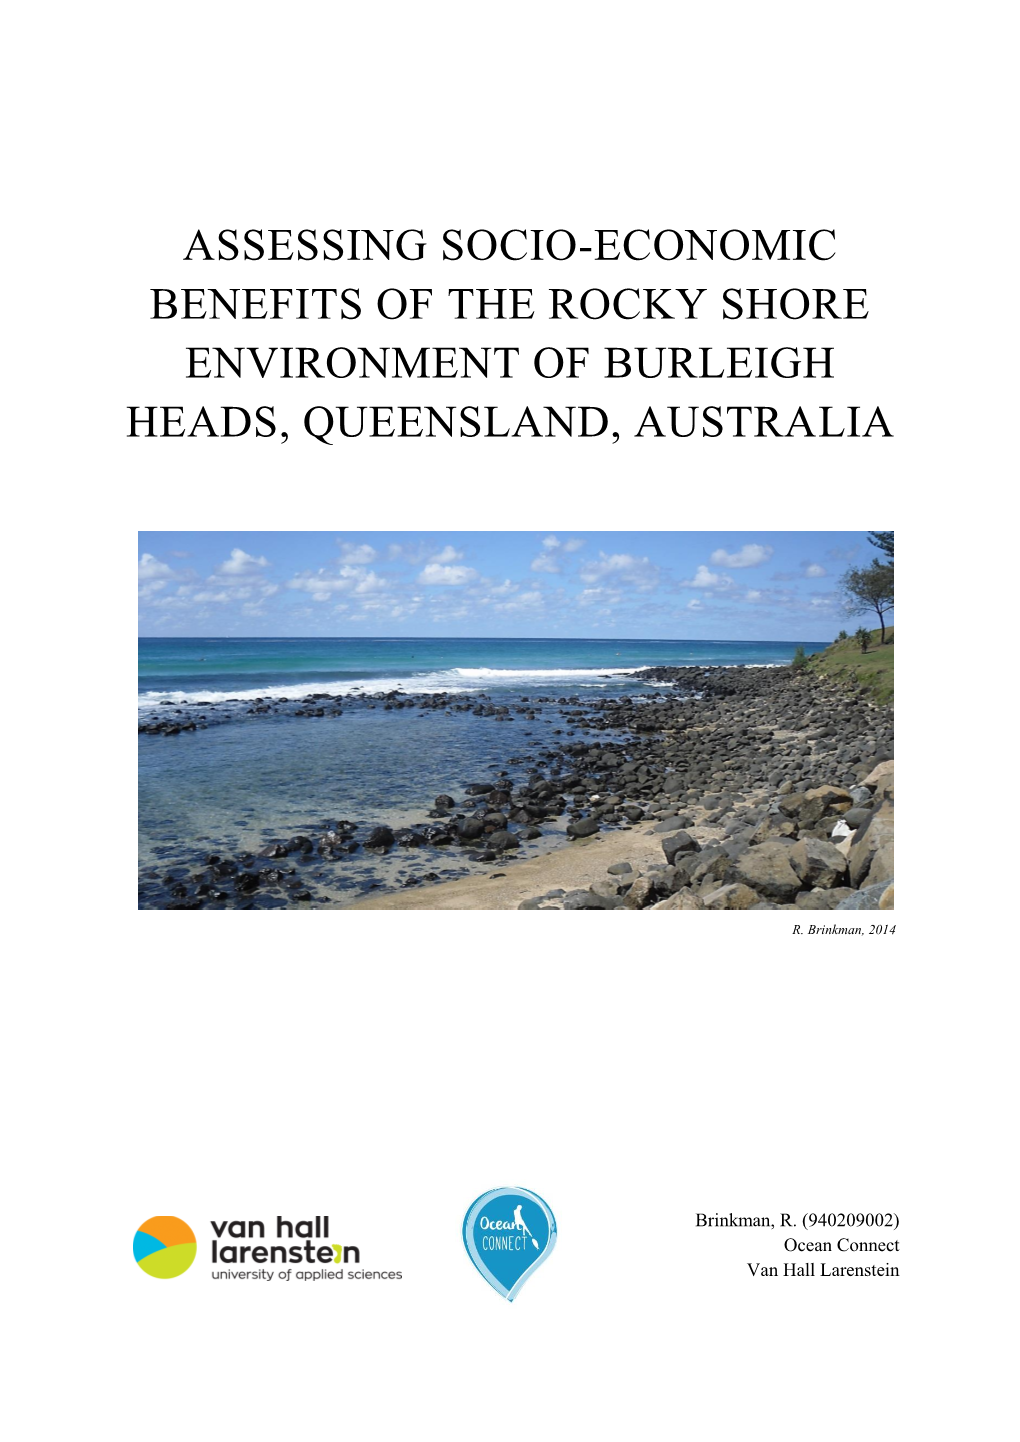 Biodiversity Assessment of the Rocky Shores of Burleigh Heads